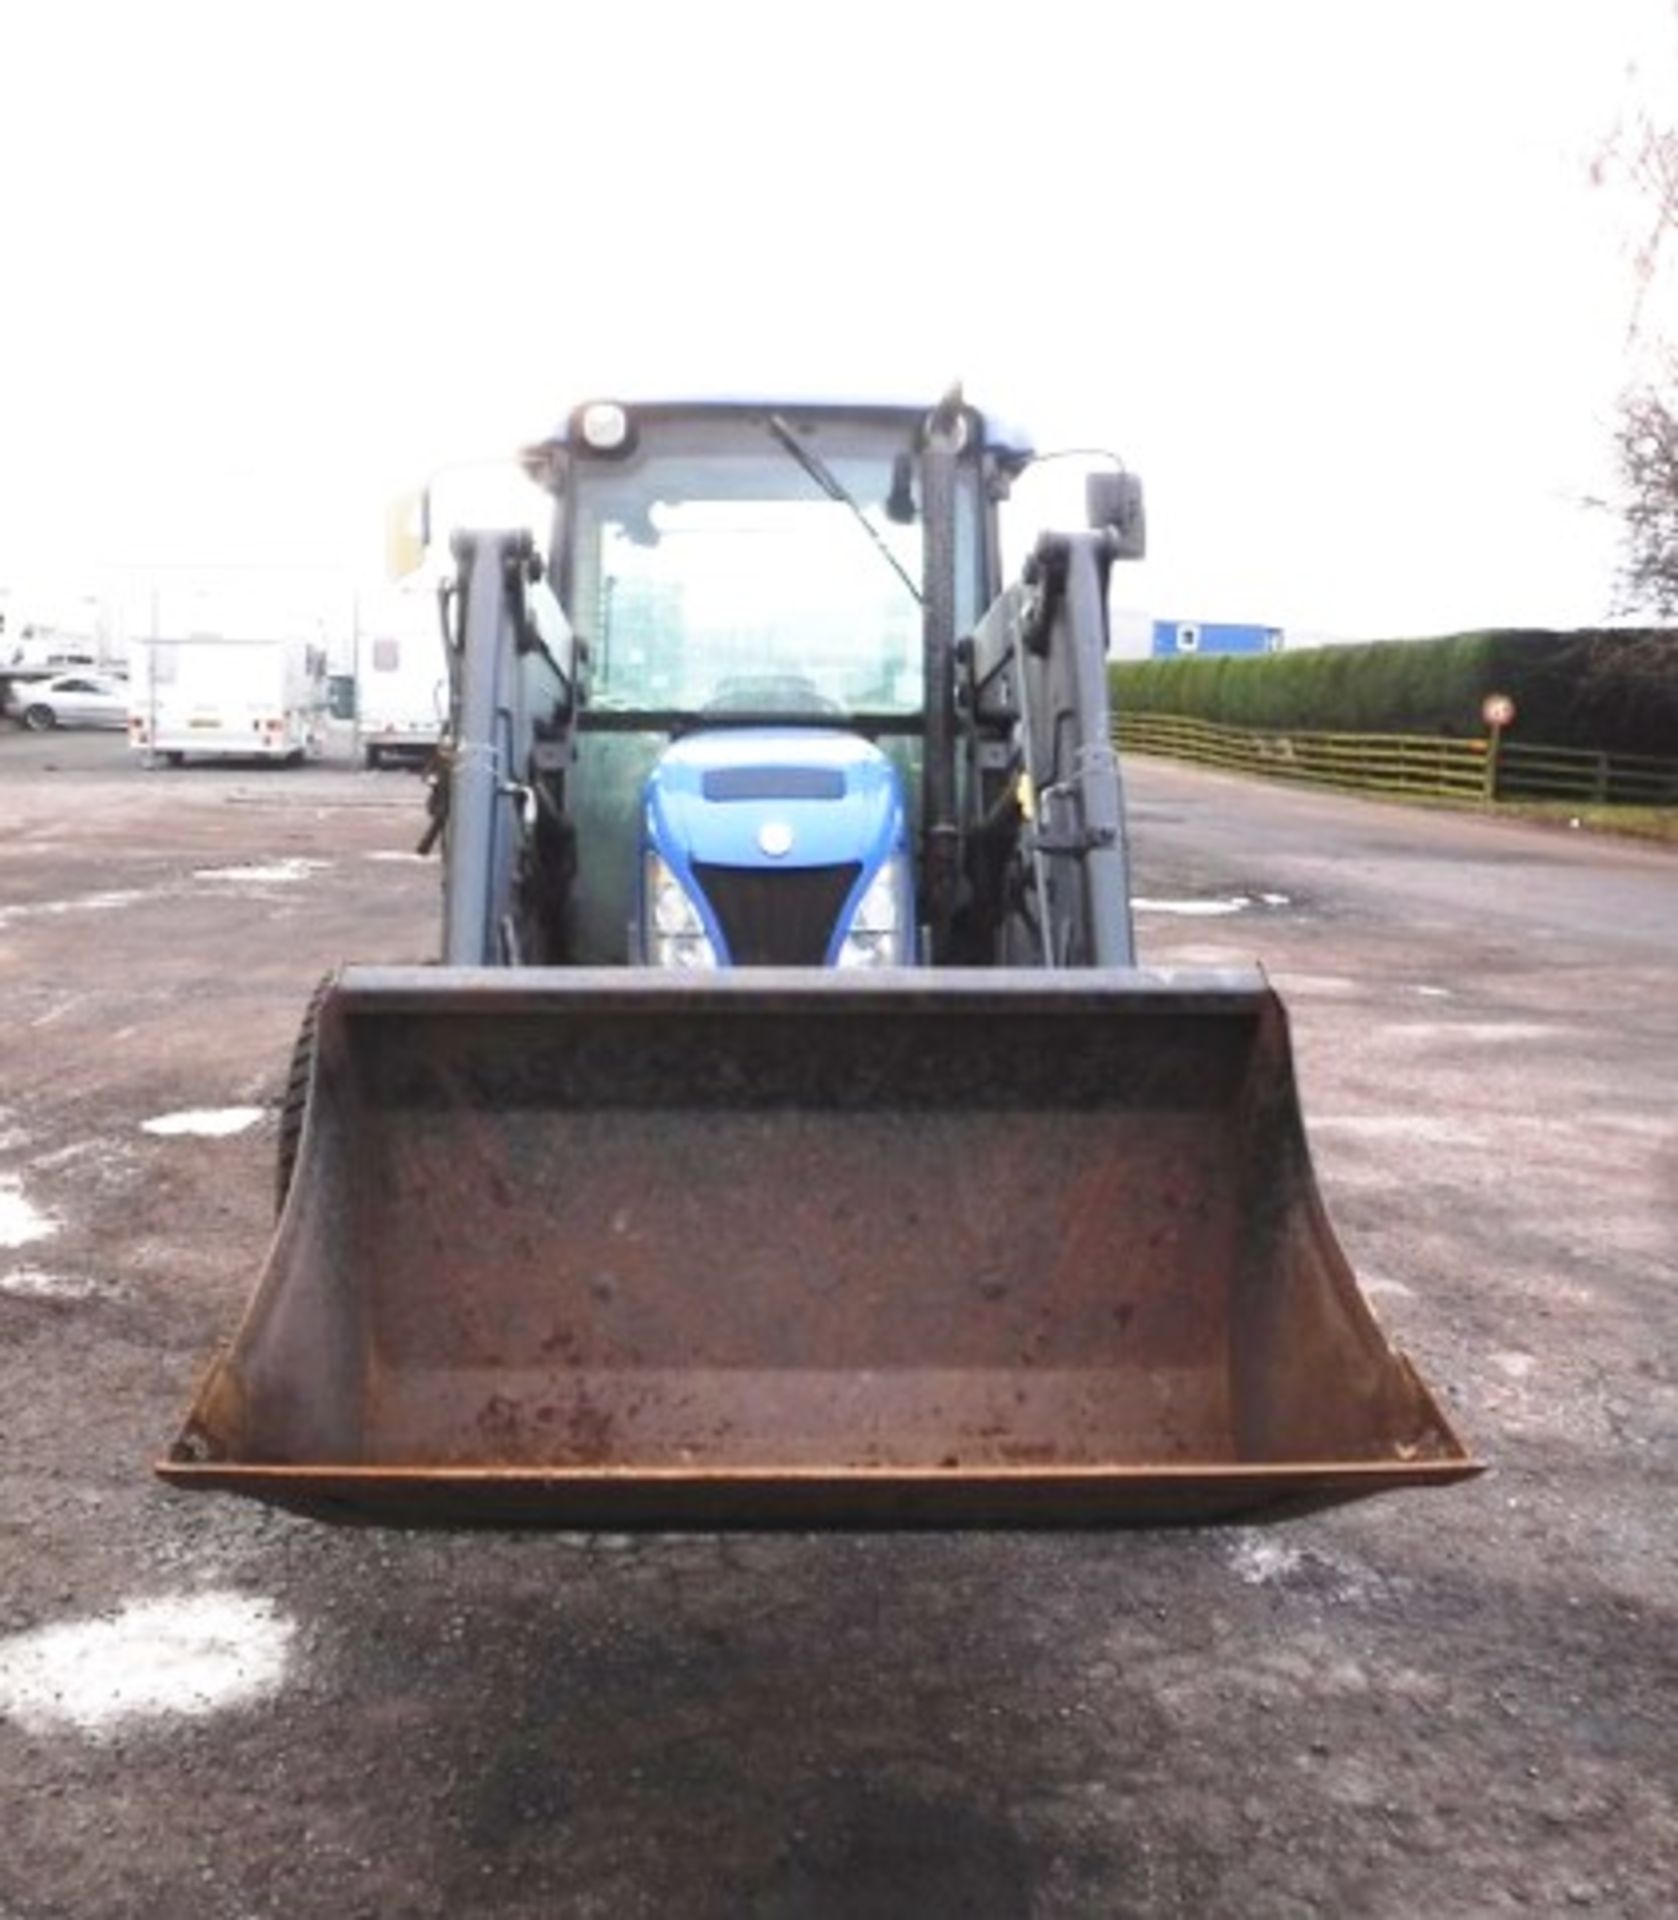 2008 NEW HOLLAND TN60 TRACTOR. REG NO SP08 DWY. SN 111054. GVW(TONNES) 4497, 3062HRS (NOT VERIFIED) - Image 23 of 40